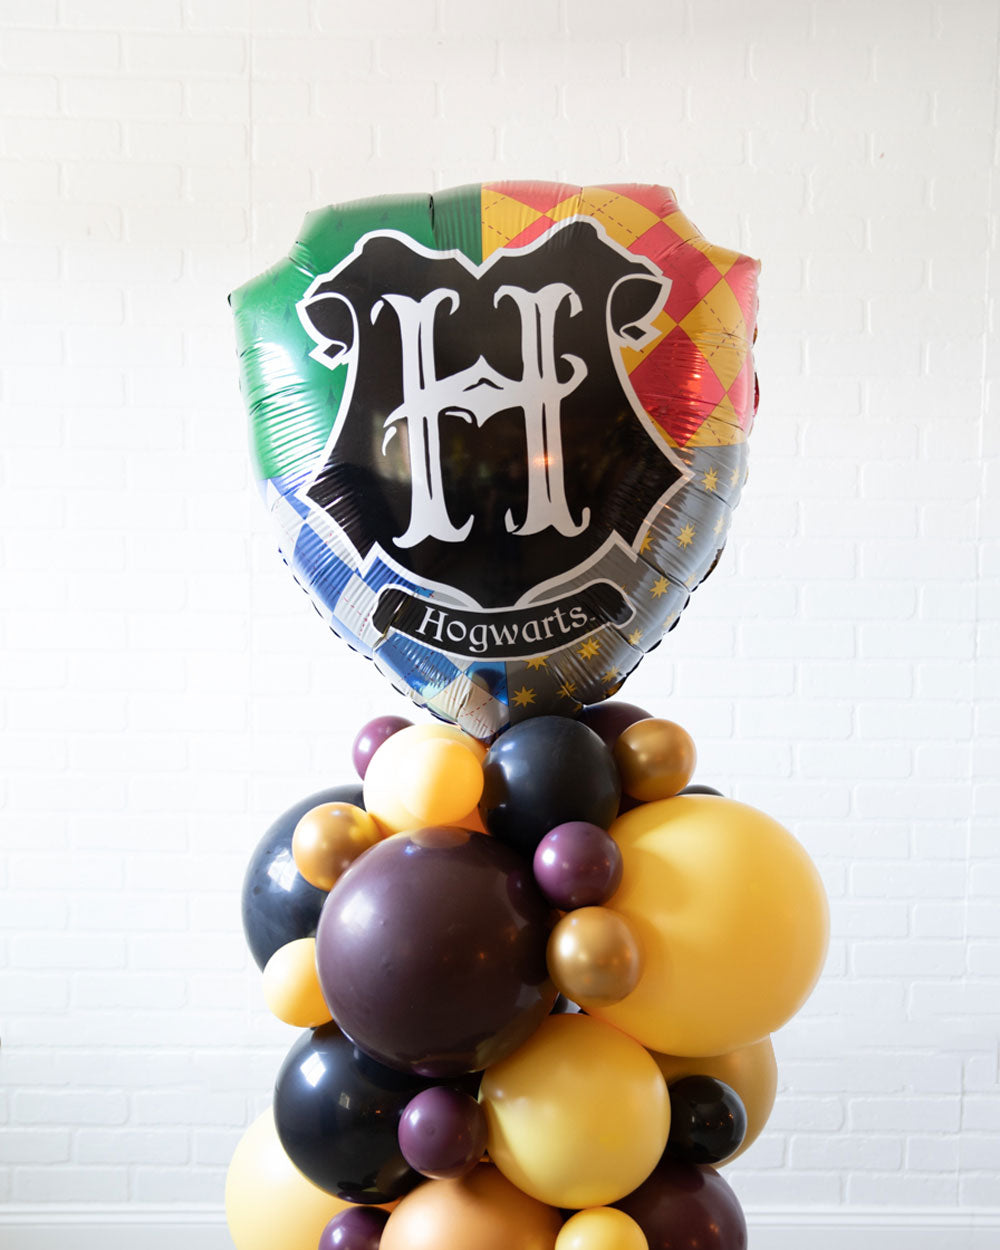 Harry Potter 30393285 18 in. Round Foil Balloon